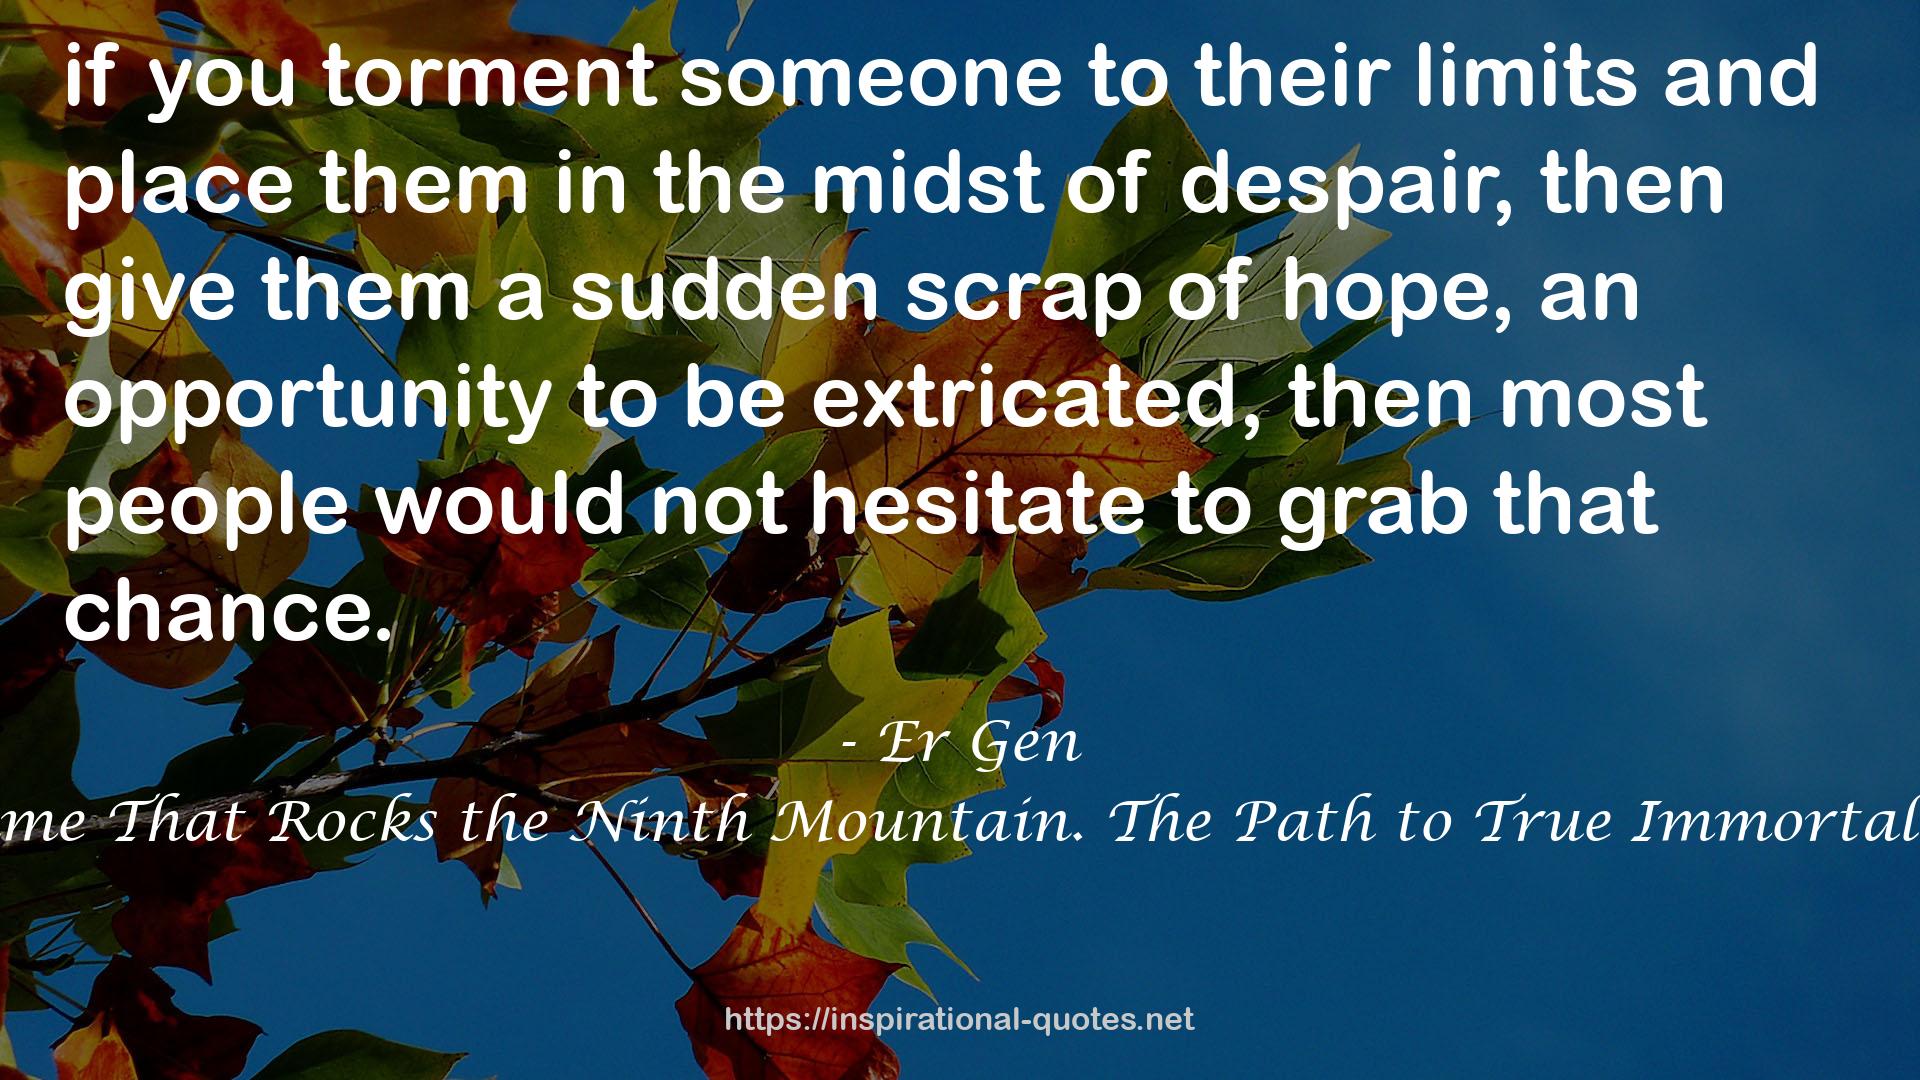 Fame That Rocks the Ninth Mountain. The Path to True Immortality QUOTES